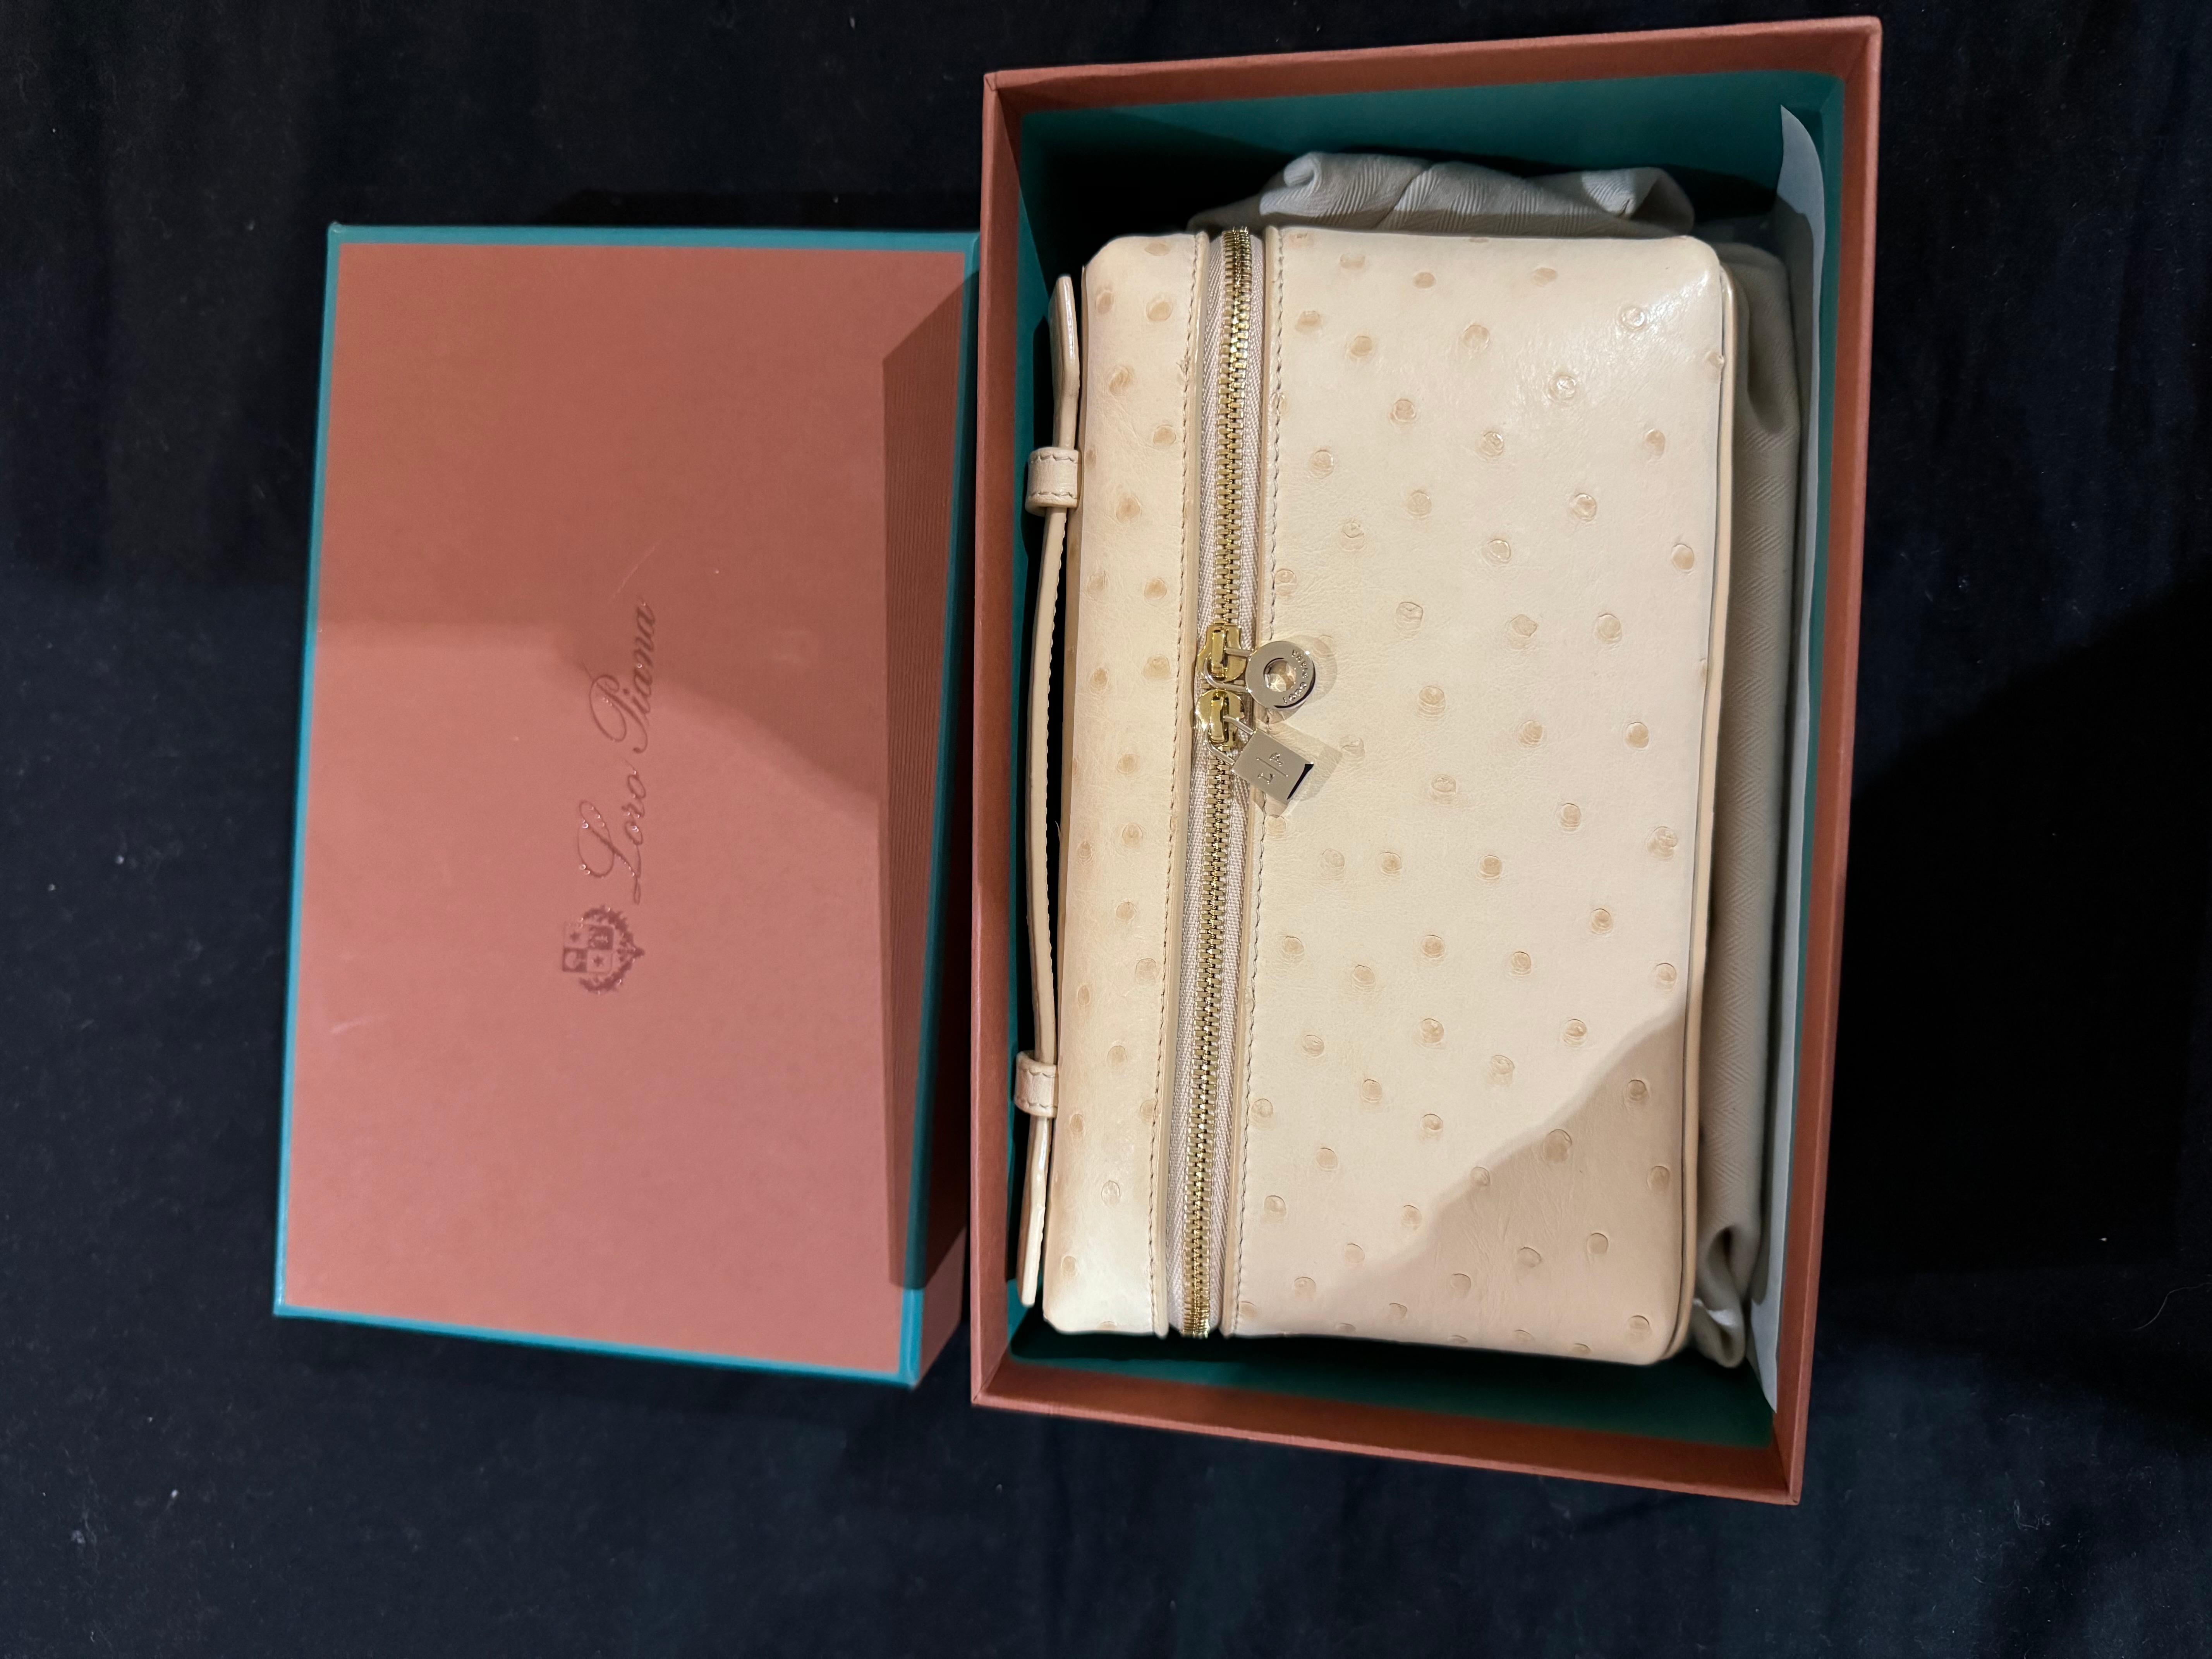 Loro Piana Extra Pocket Pouch L19 Bag in Ostrich leather in pink/beige colour with rose gold hardware. Loro Piana's pouch is elegant and versatile. The structured silhouette has been crafted from ostrich leather with a smooth finish and opens to a